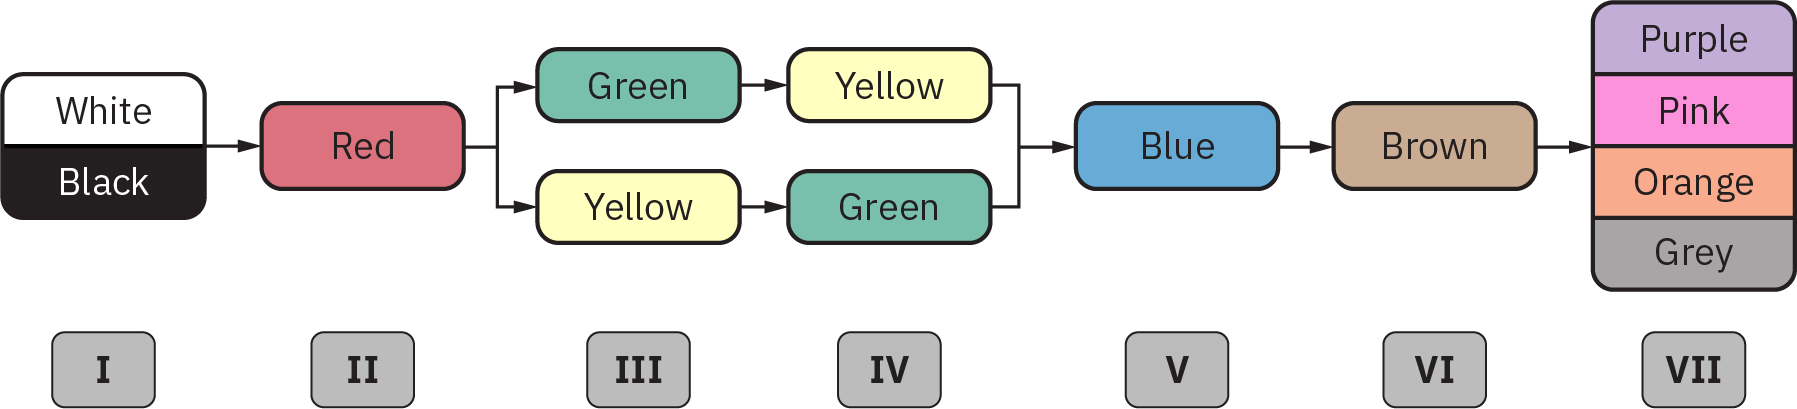 A diagram depicting the following: at Stage 1, markers for “White” and “Black”; at Stage 2, a marker for “Red”; at Stage 3, markers for “Green” and “Yellow≵; at Stage 4, markers for “Yellow” and “Green”; at Stage 5, “Blue”; at Stage 6, “Brown”; and at Stage 7, “Purple,” “Pink,” “Orange,” and “Grey”.